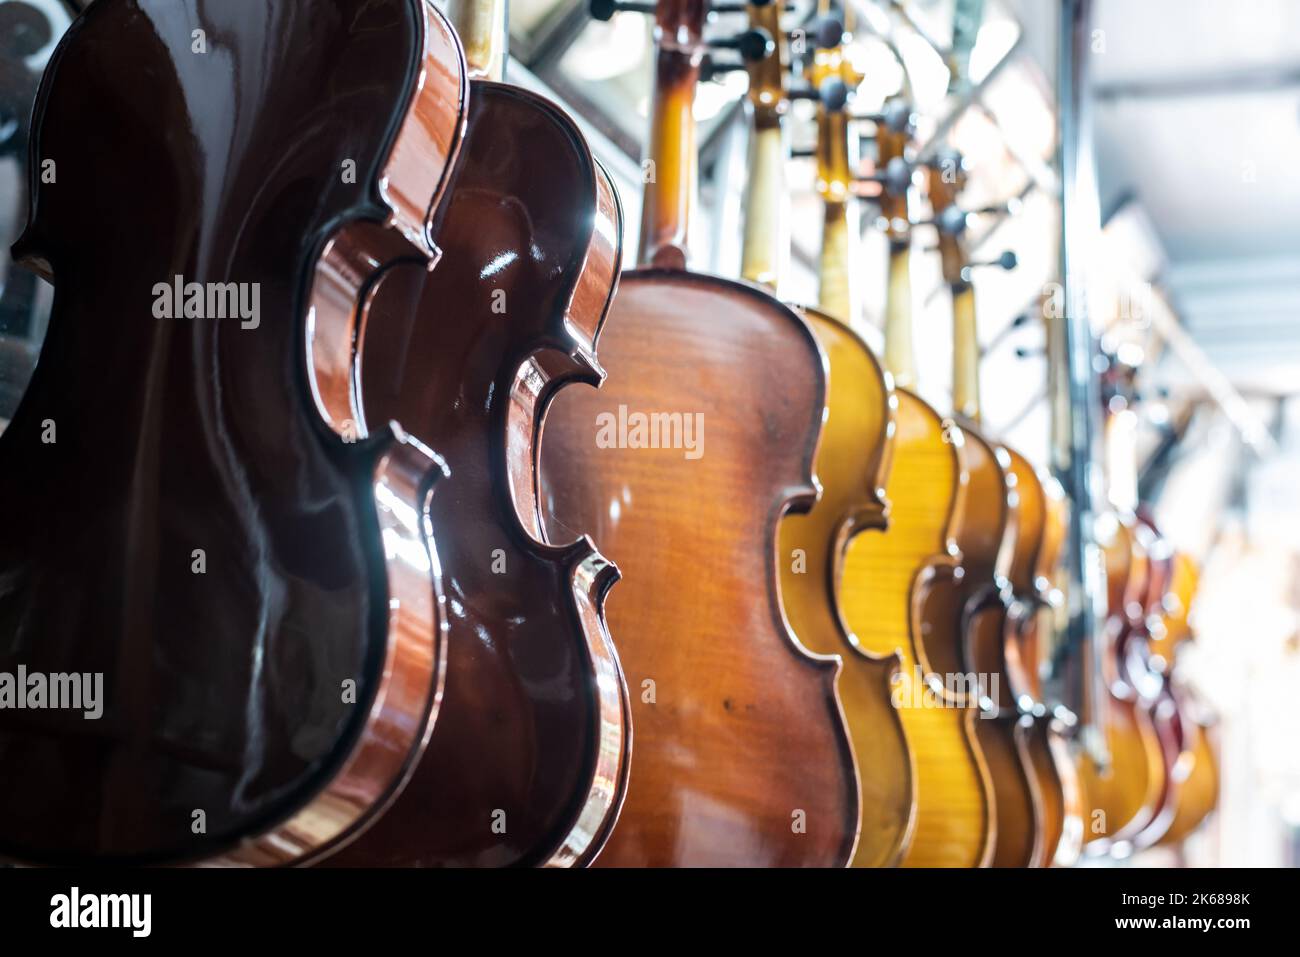 Violins are hanging in retail store to sell Stock Photo